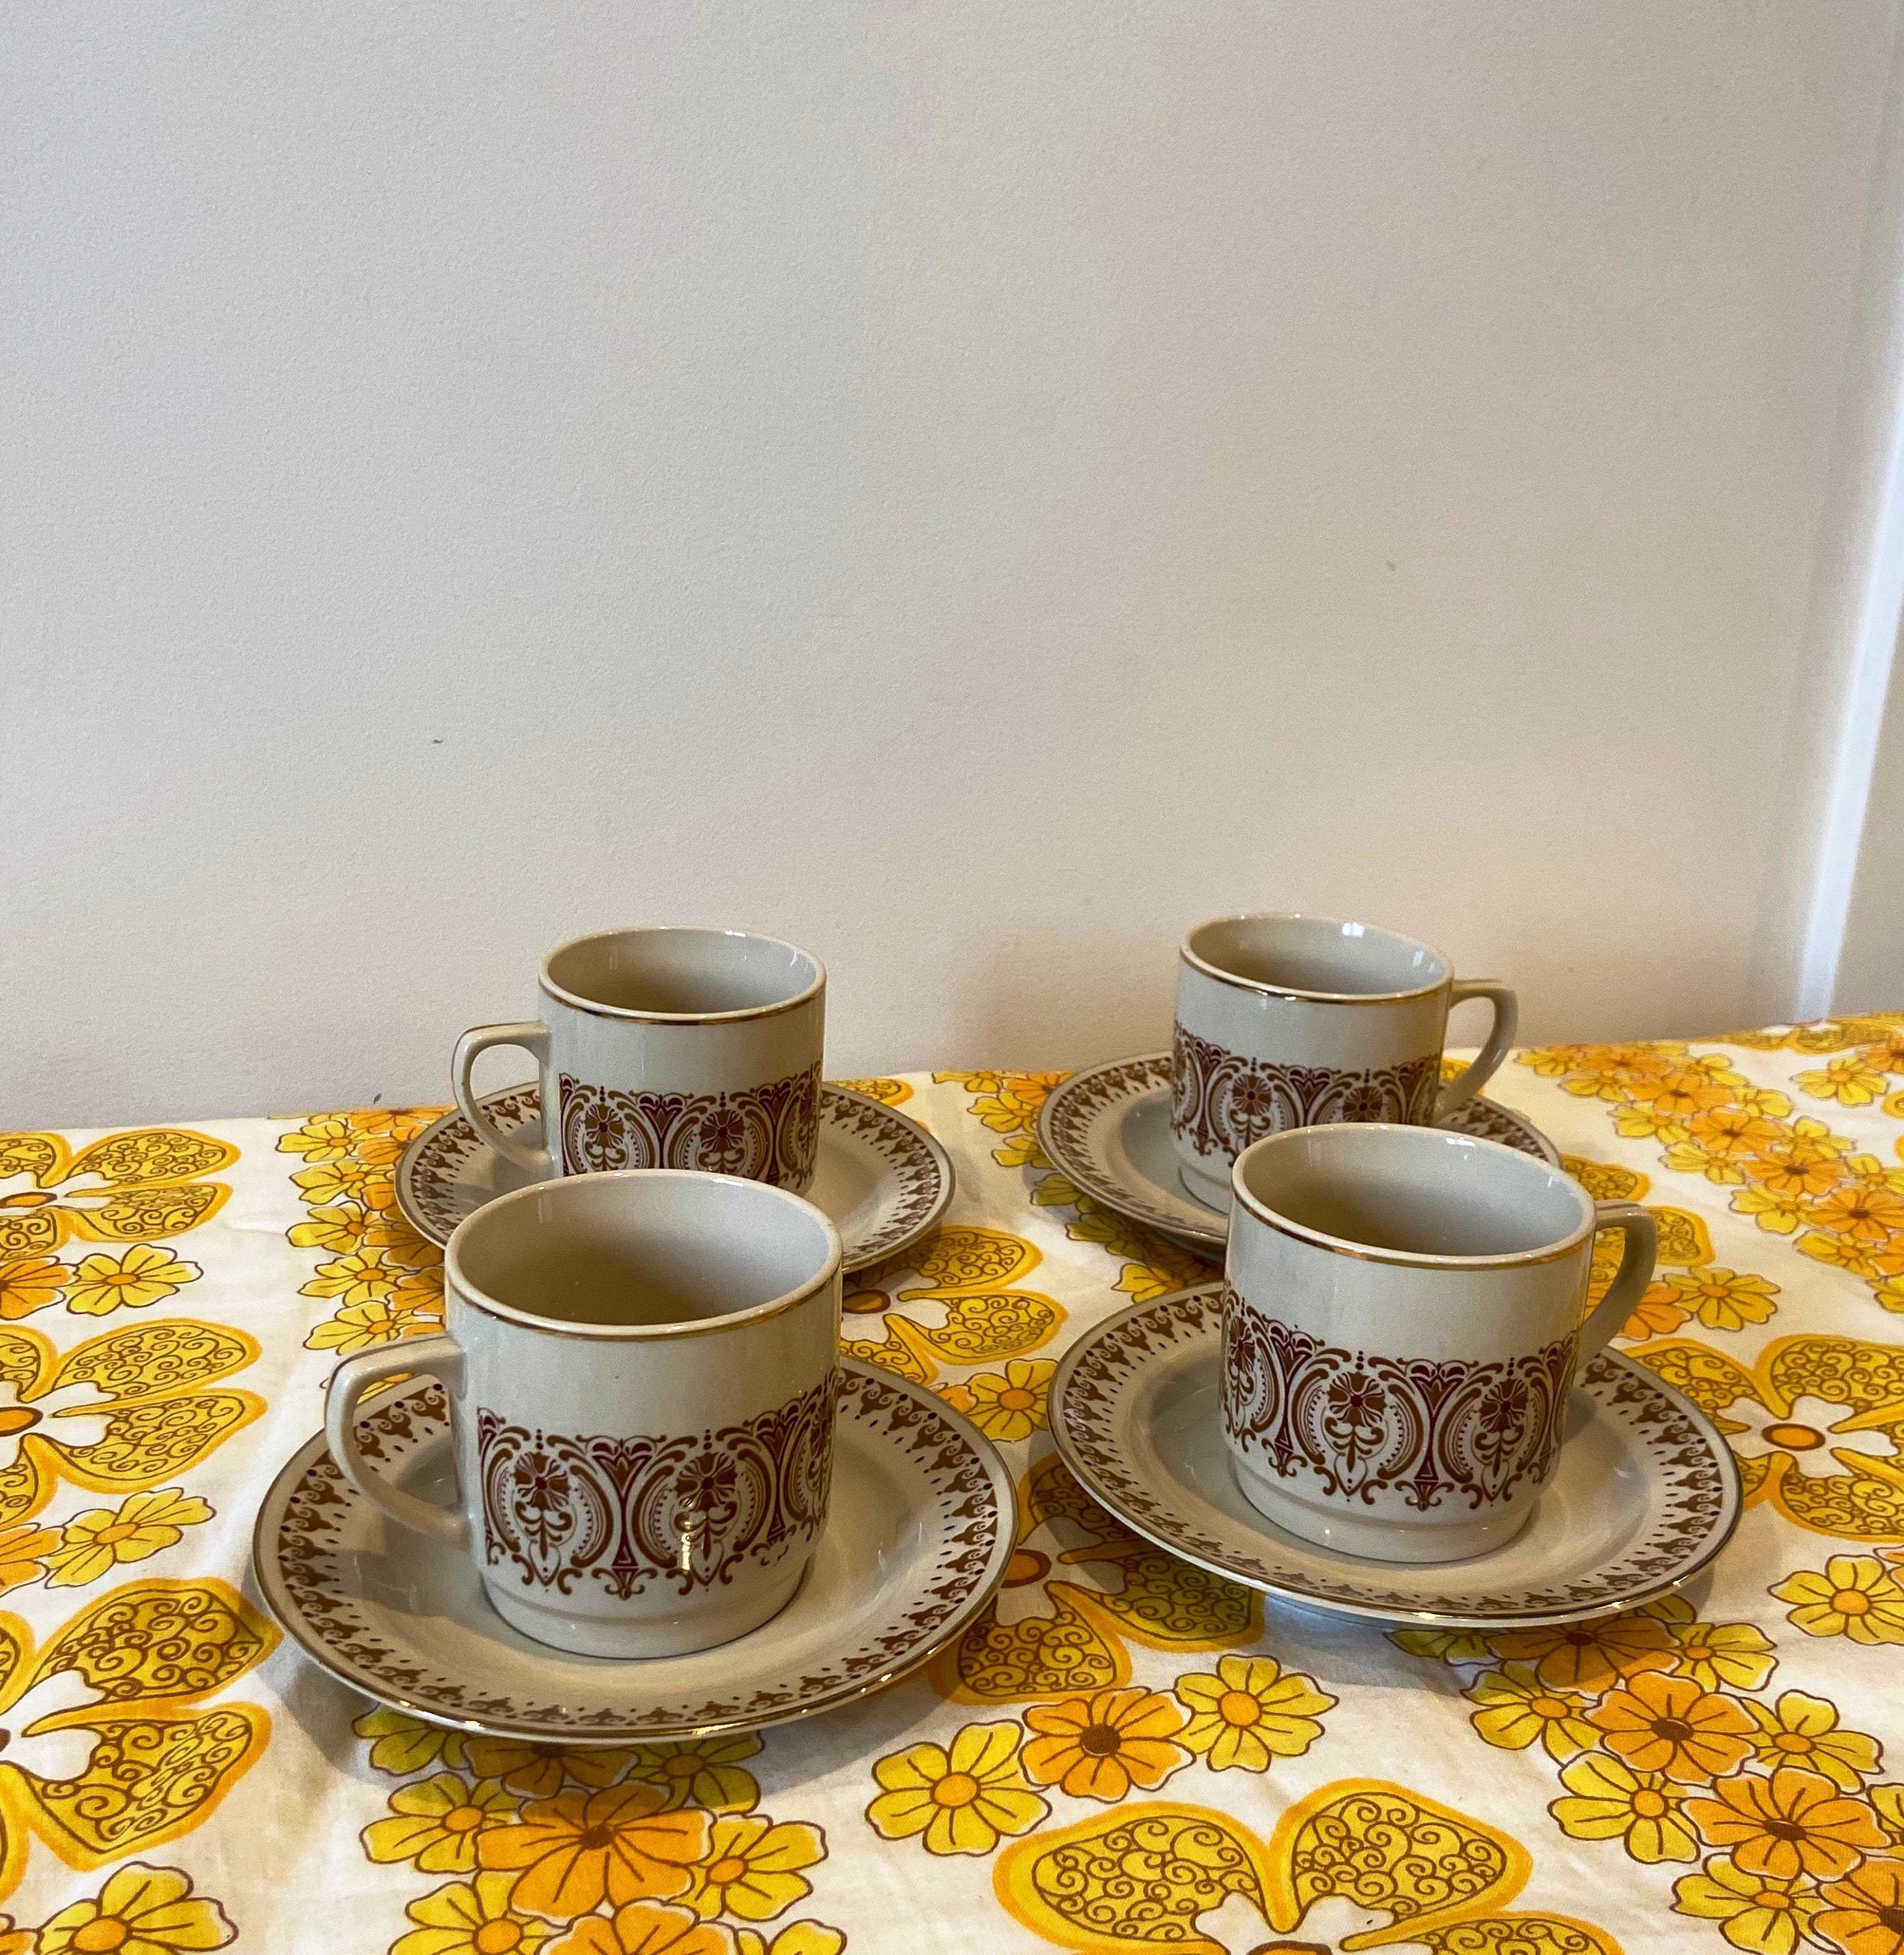 Set of Four Kun-Lun Tea or Coffee Set Retro Vintage Cups and | Etsy